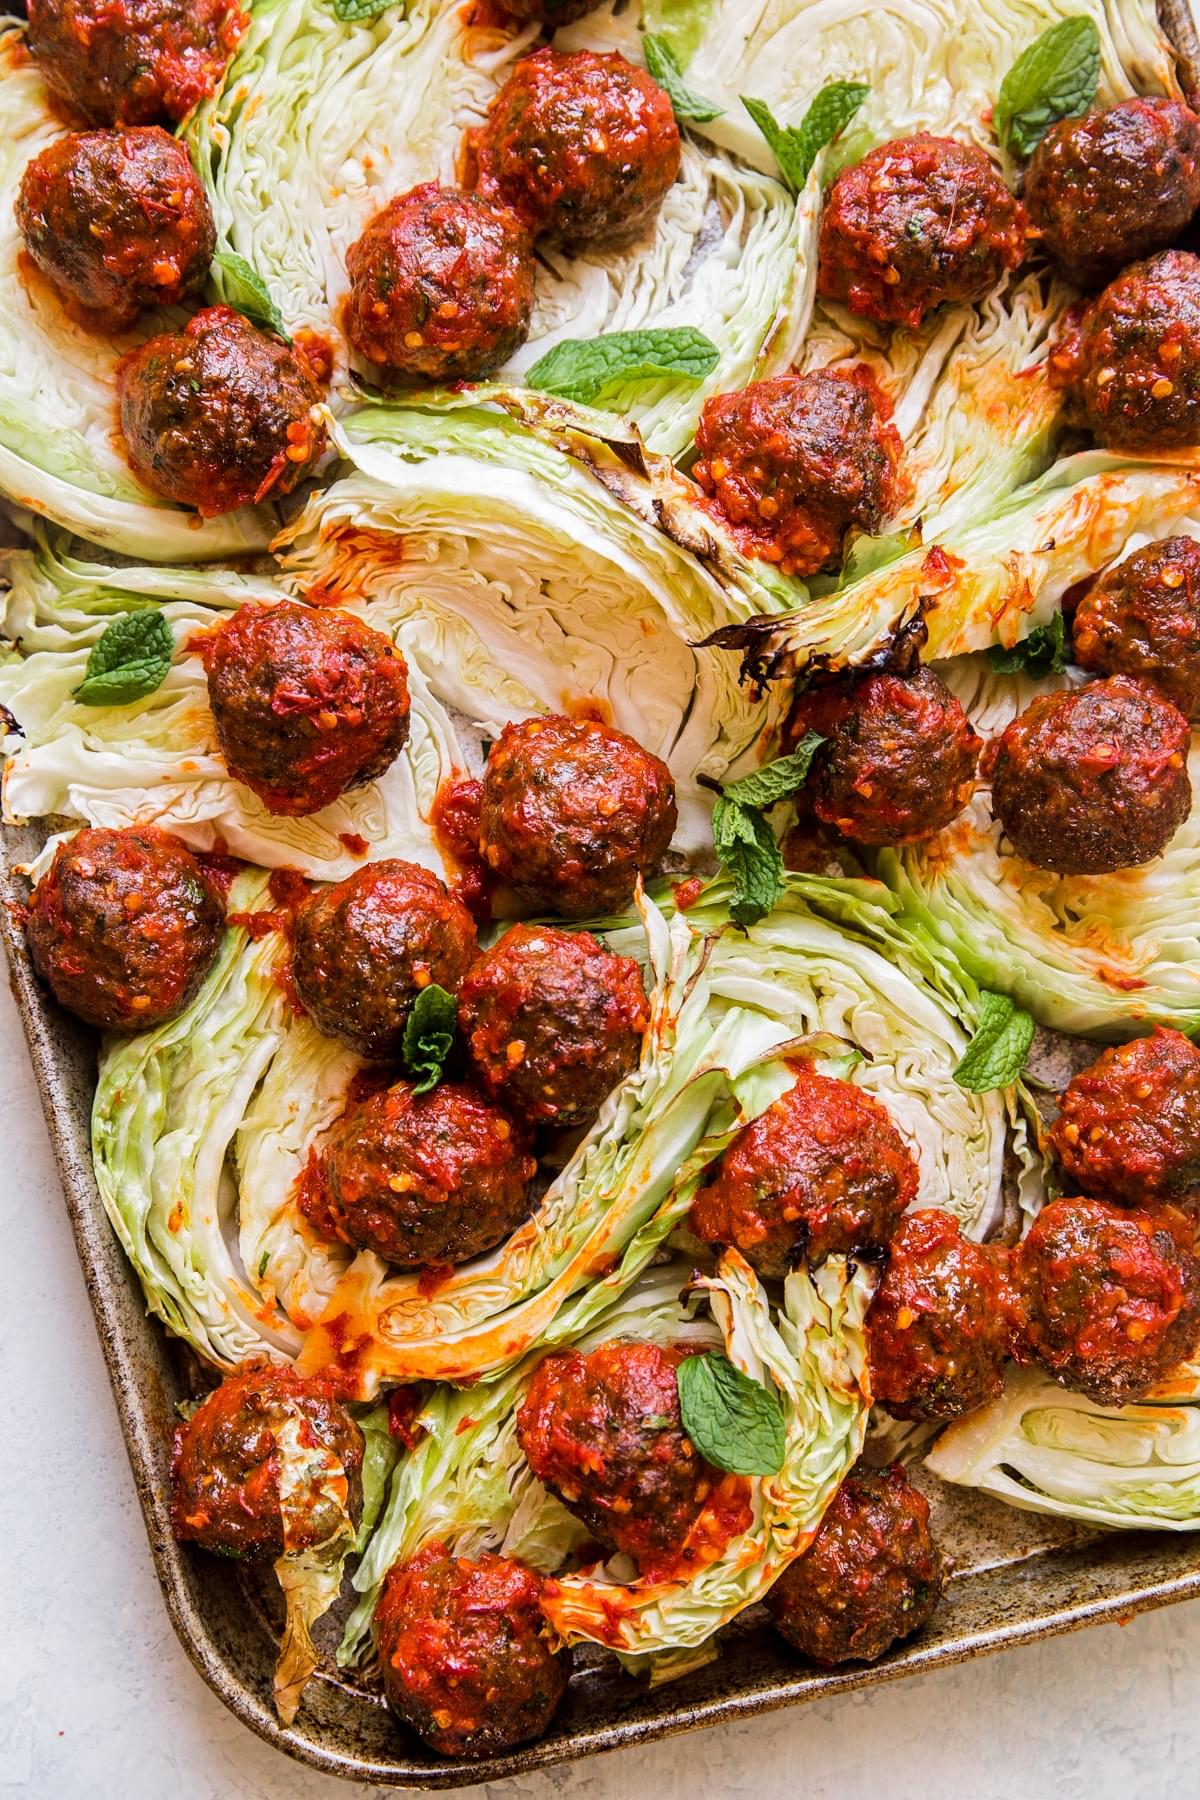 Sheetpan Meatballs with Cabbage and Harissa